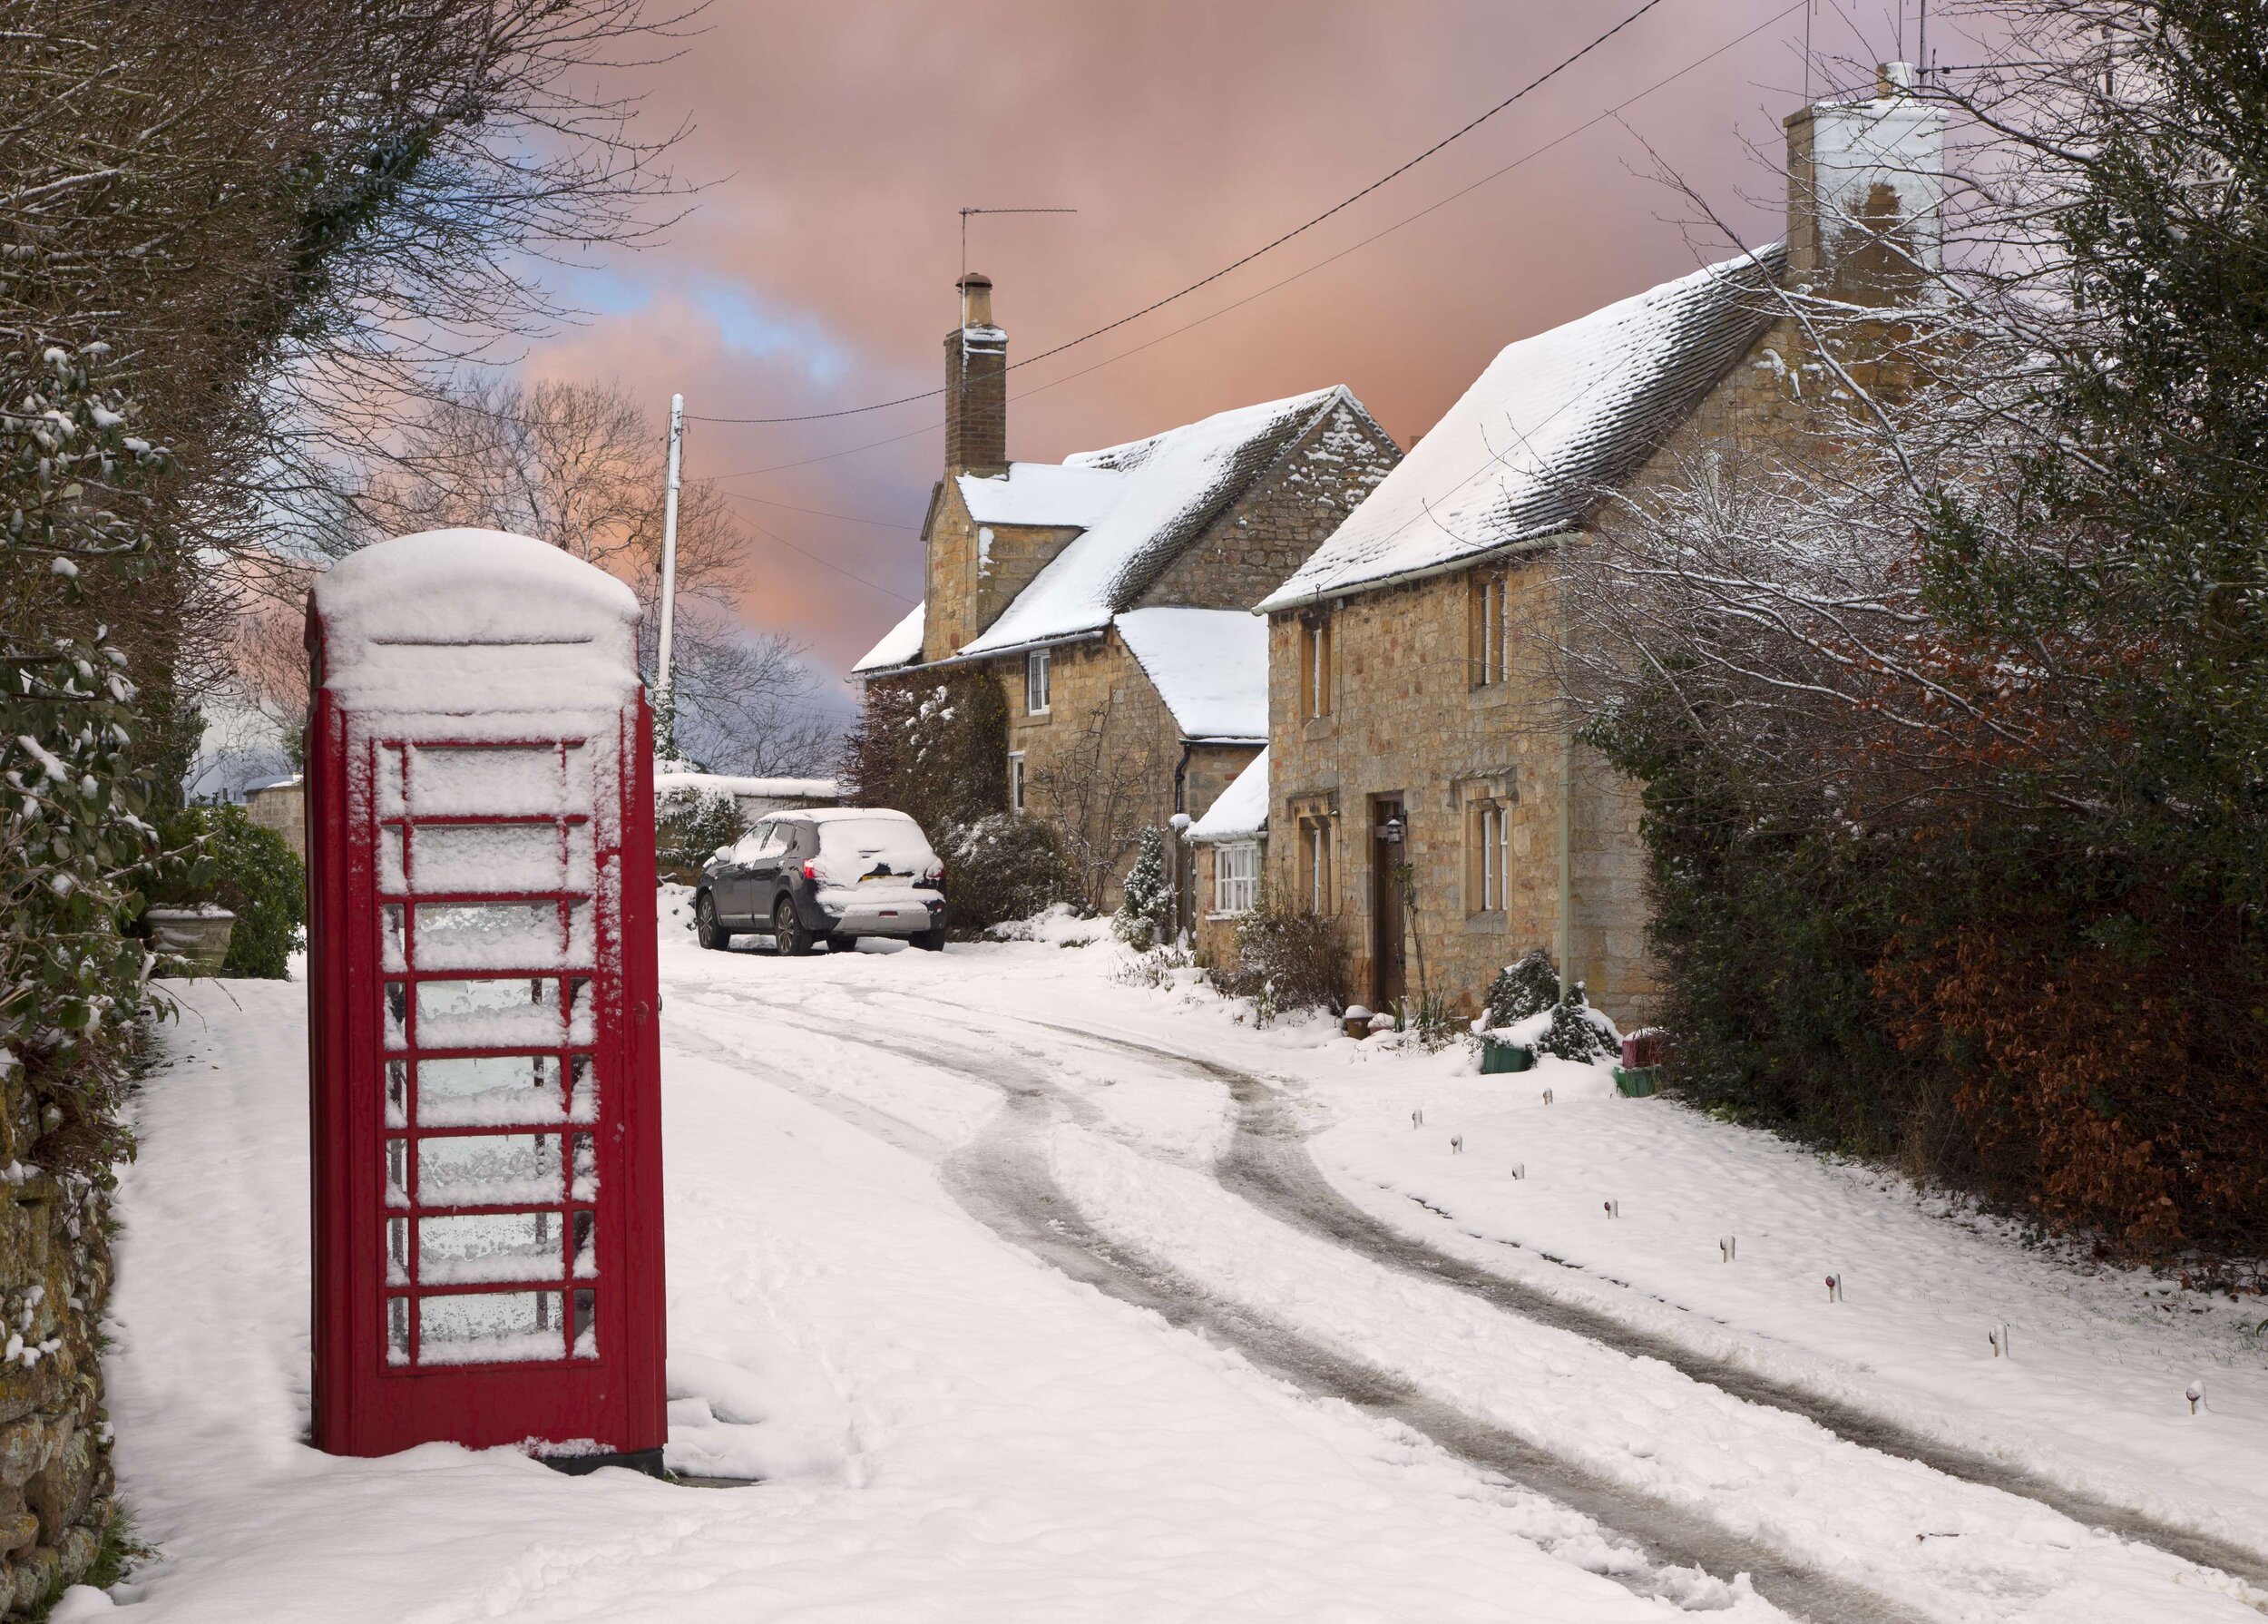 A Village Covered In Snow With A red Phone Box